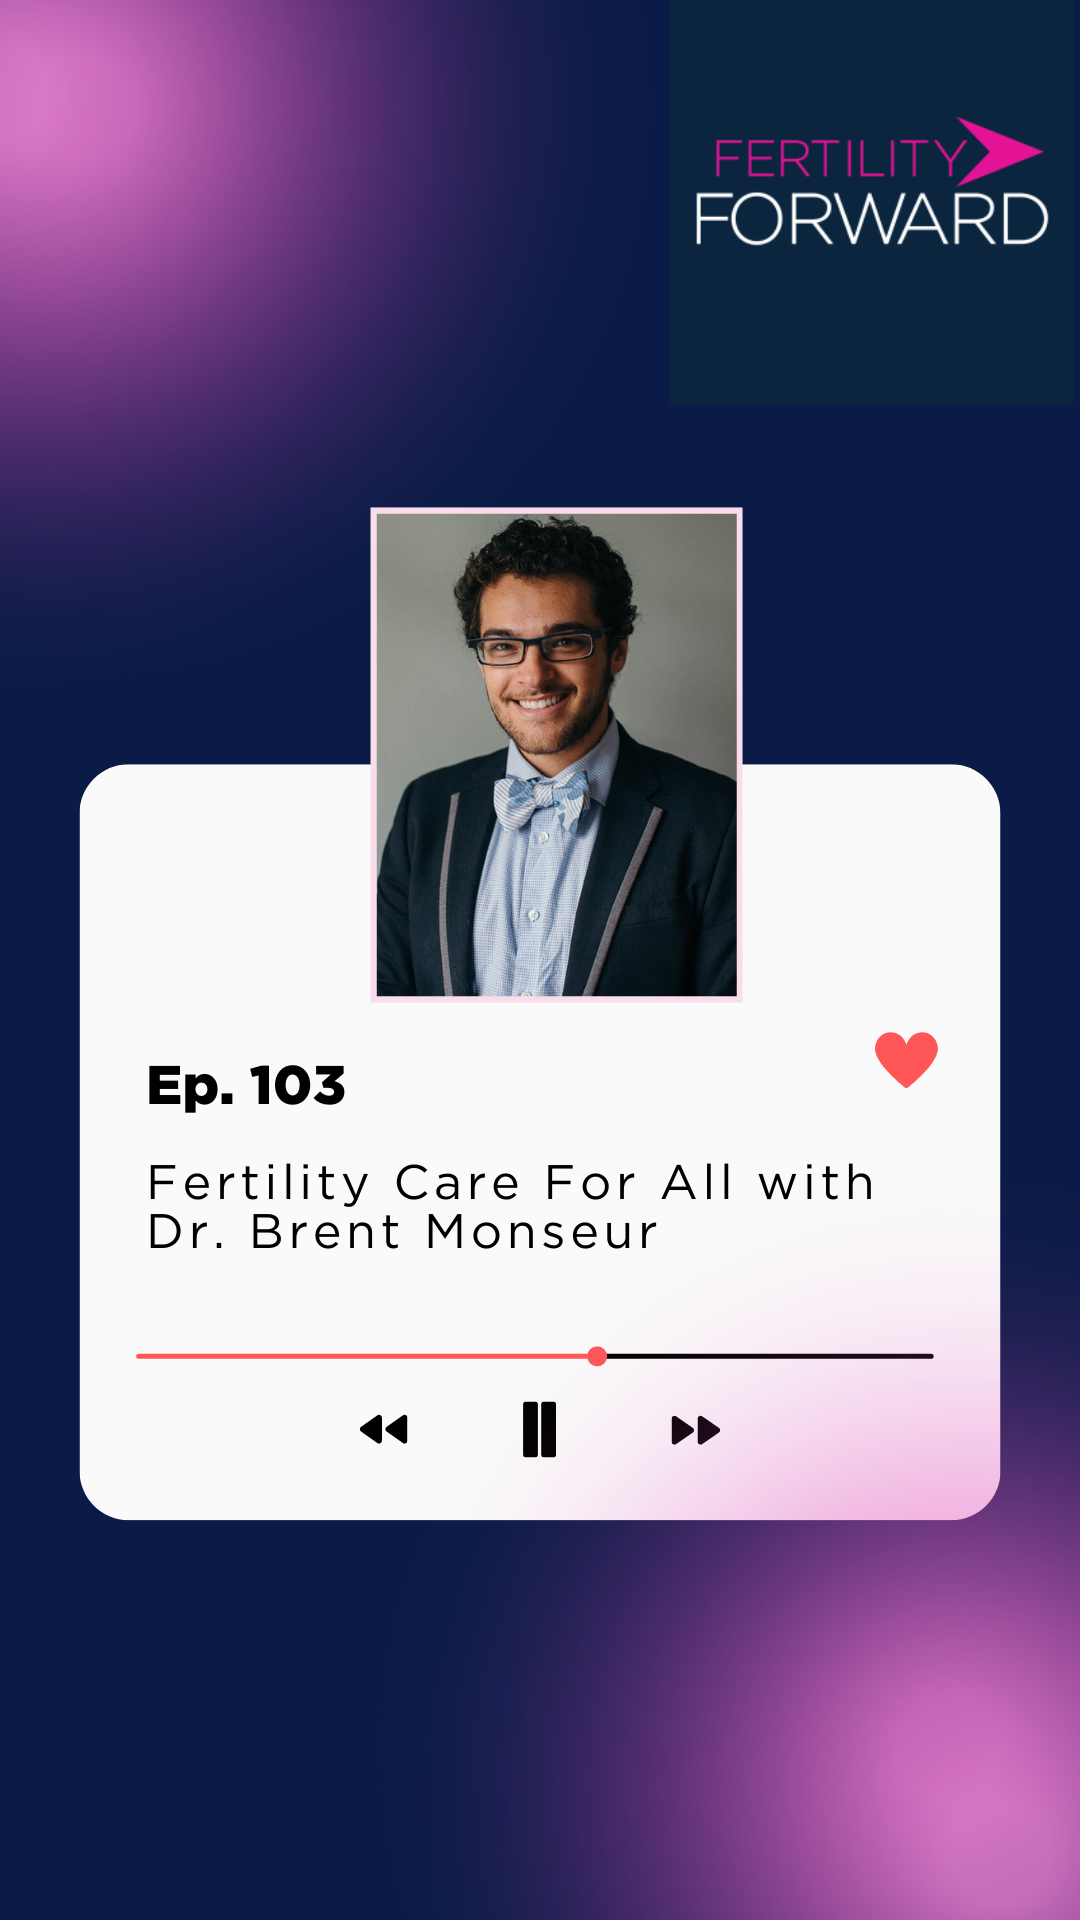 Ep 103: Fertility Care For All with Dr. Brent Monseur